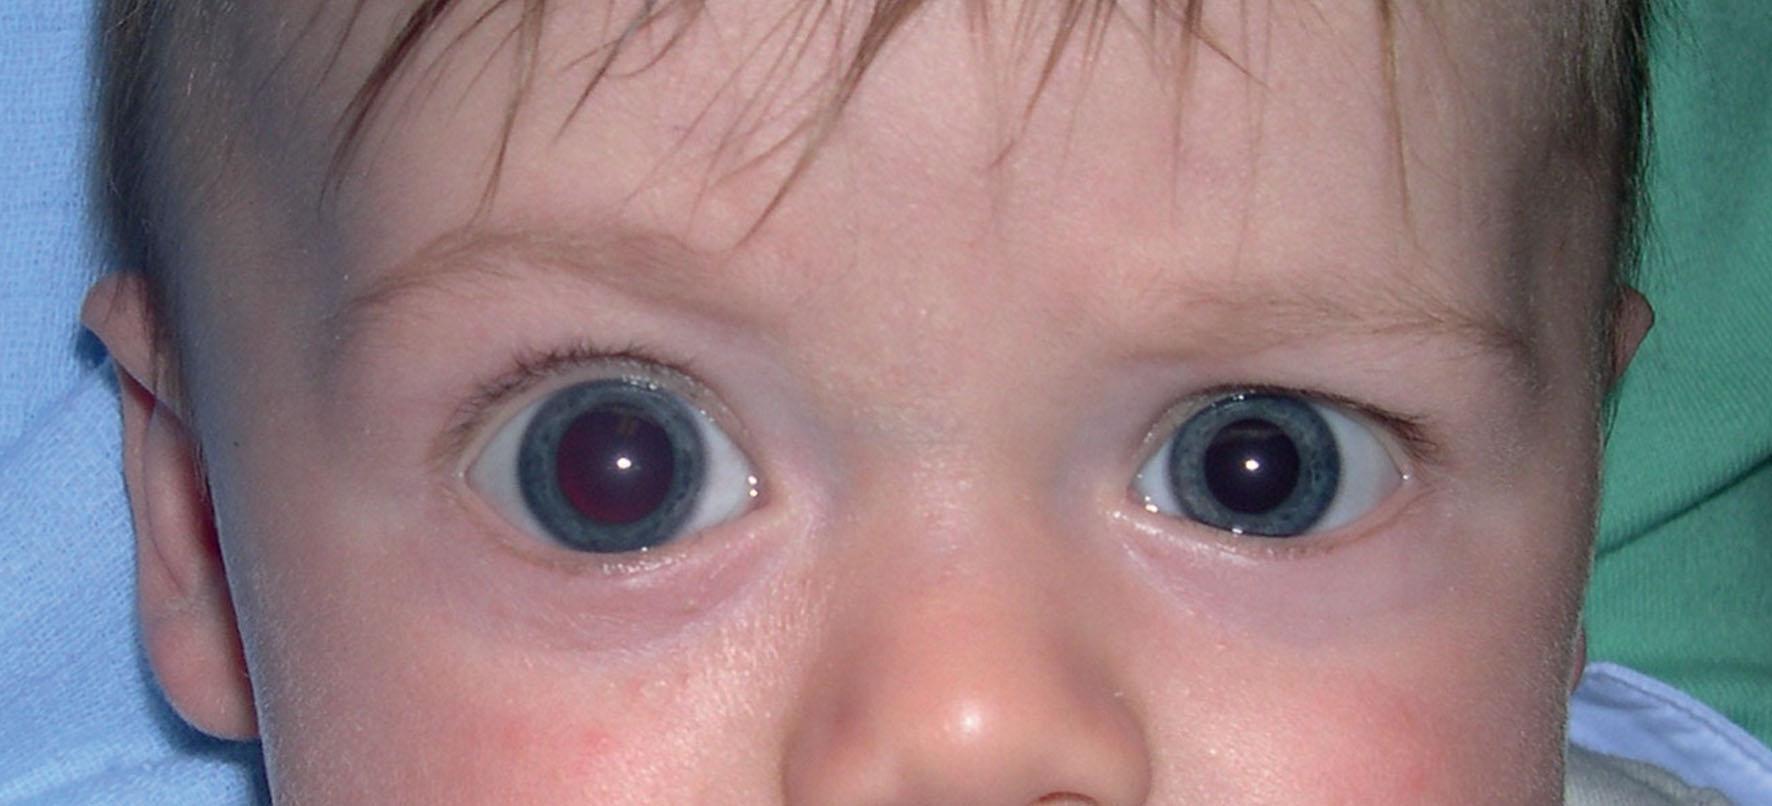 Fig. 36.1, Infant with right buphthalmos. The other eye often has similar features.